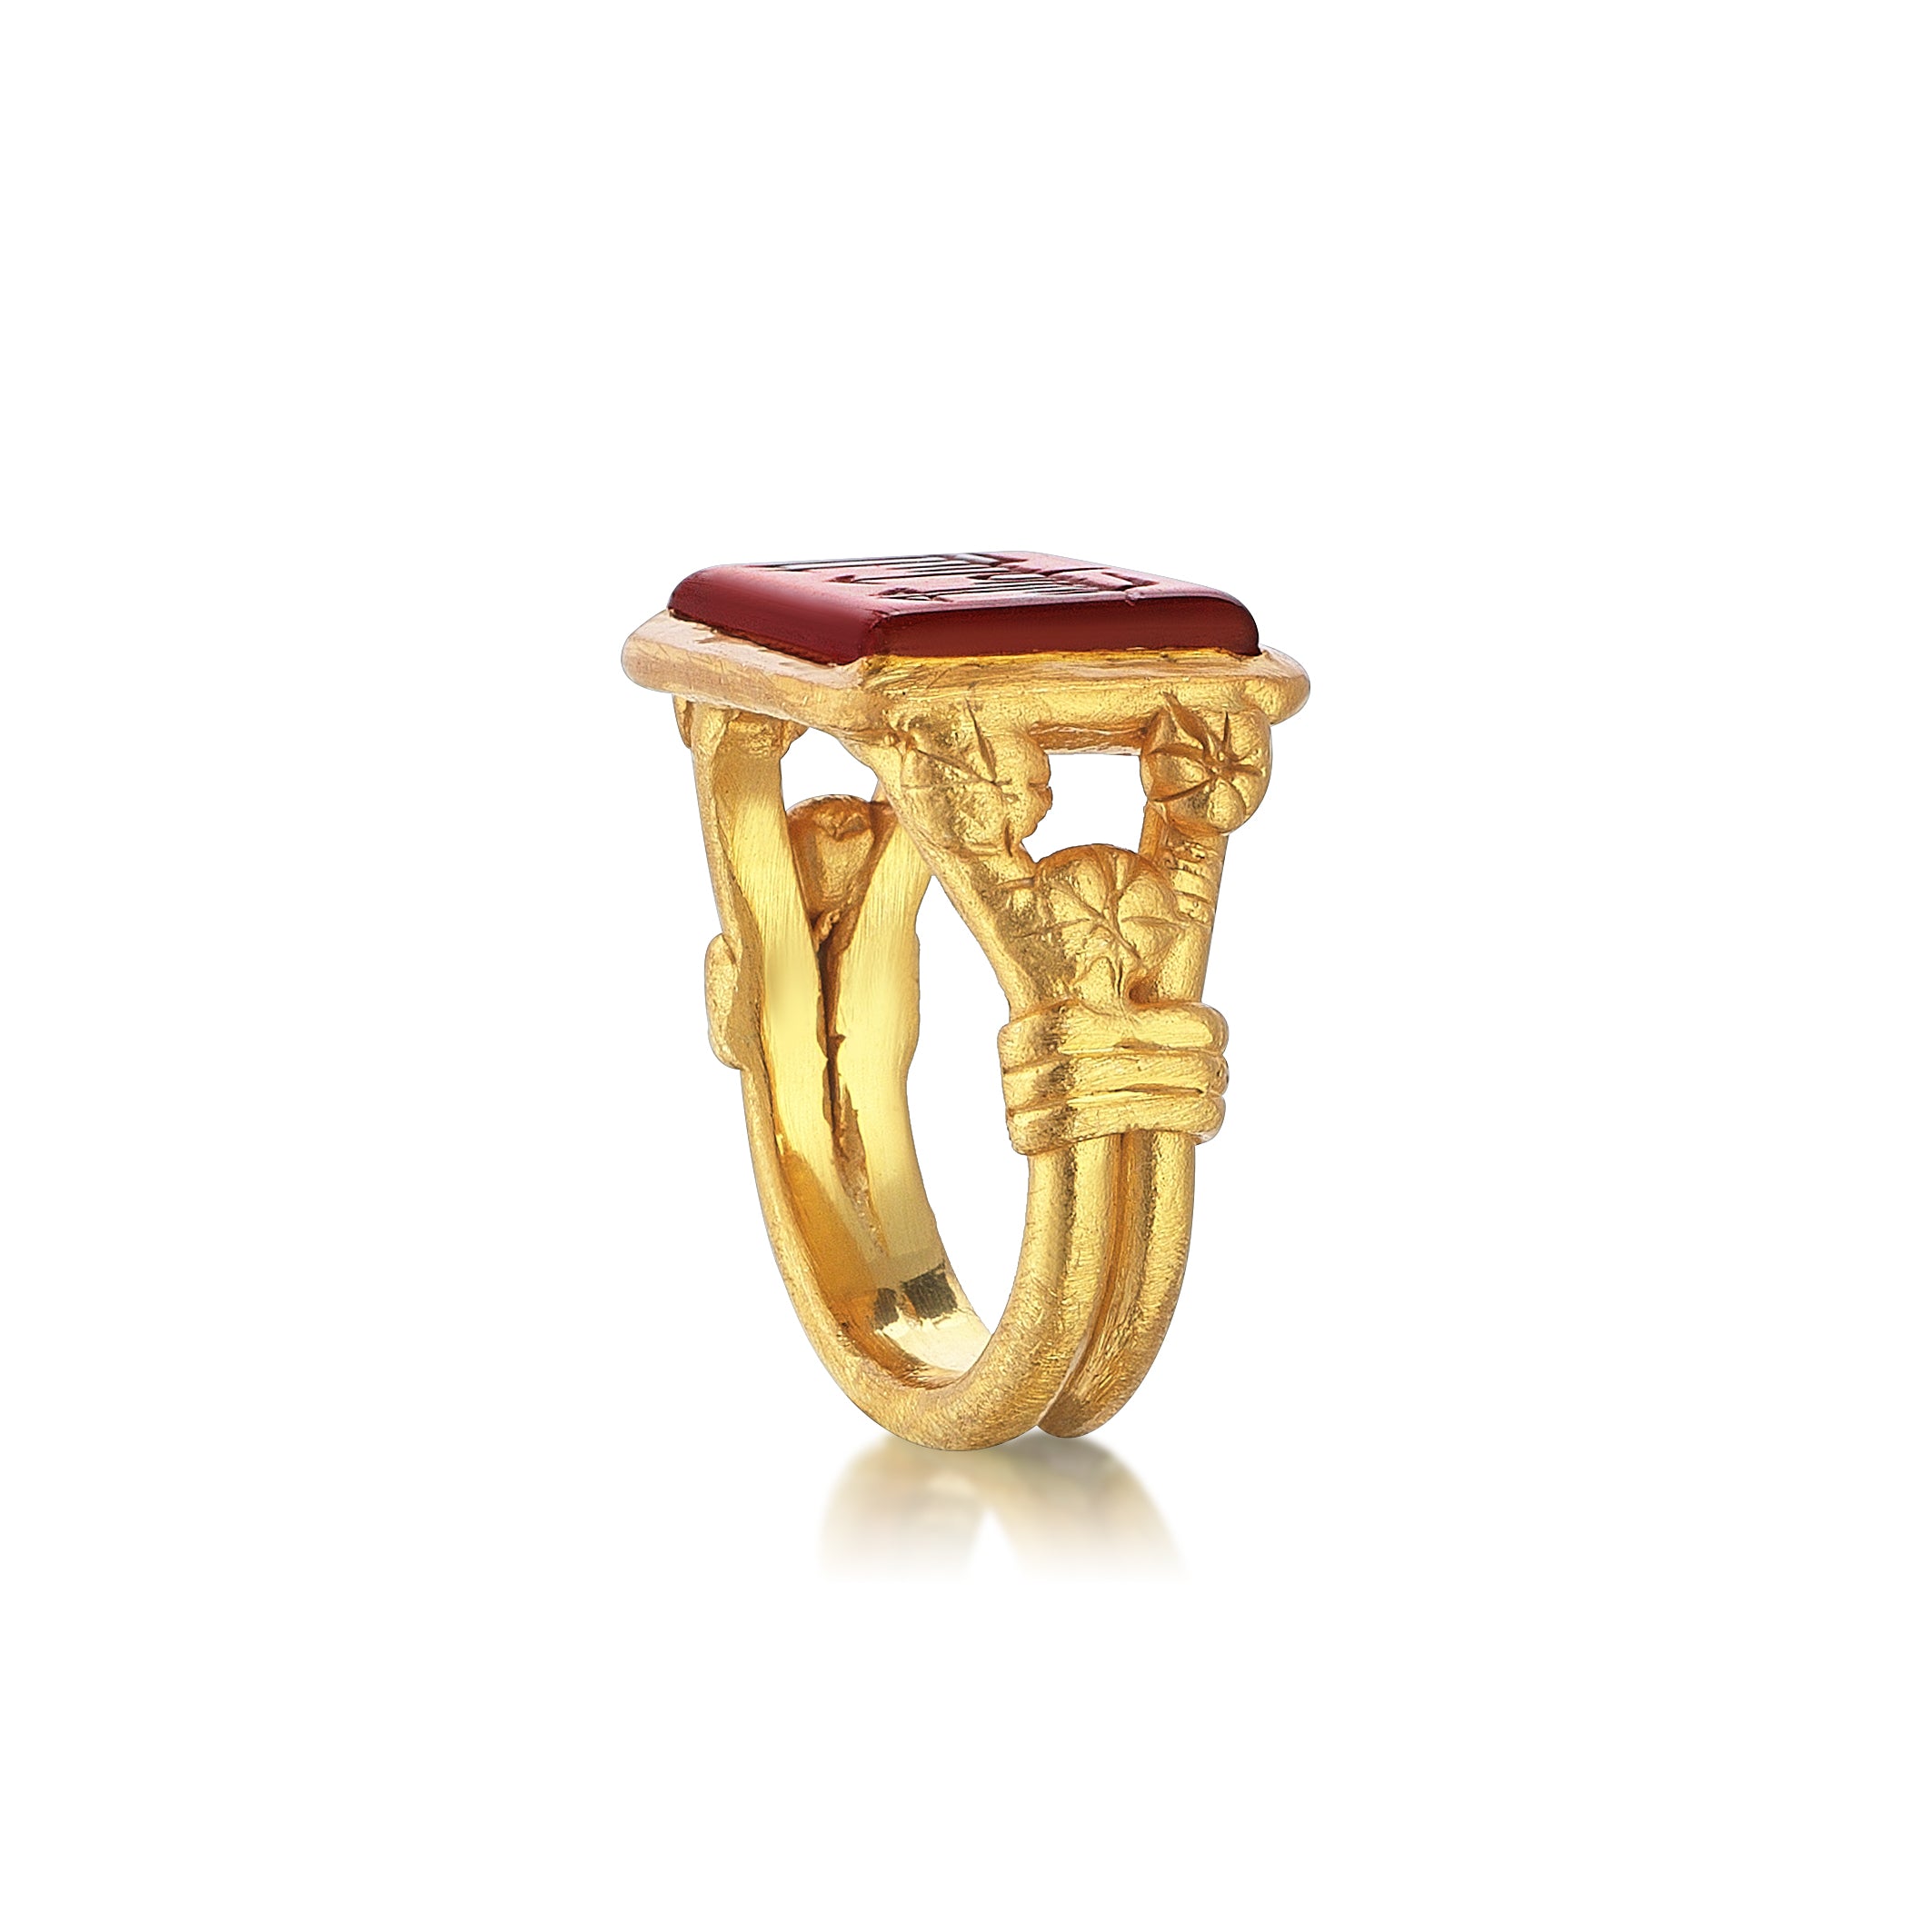 The Kufic Ring